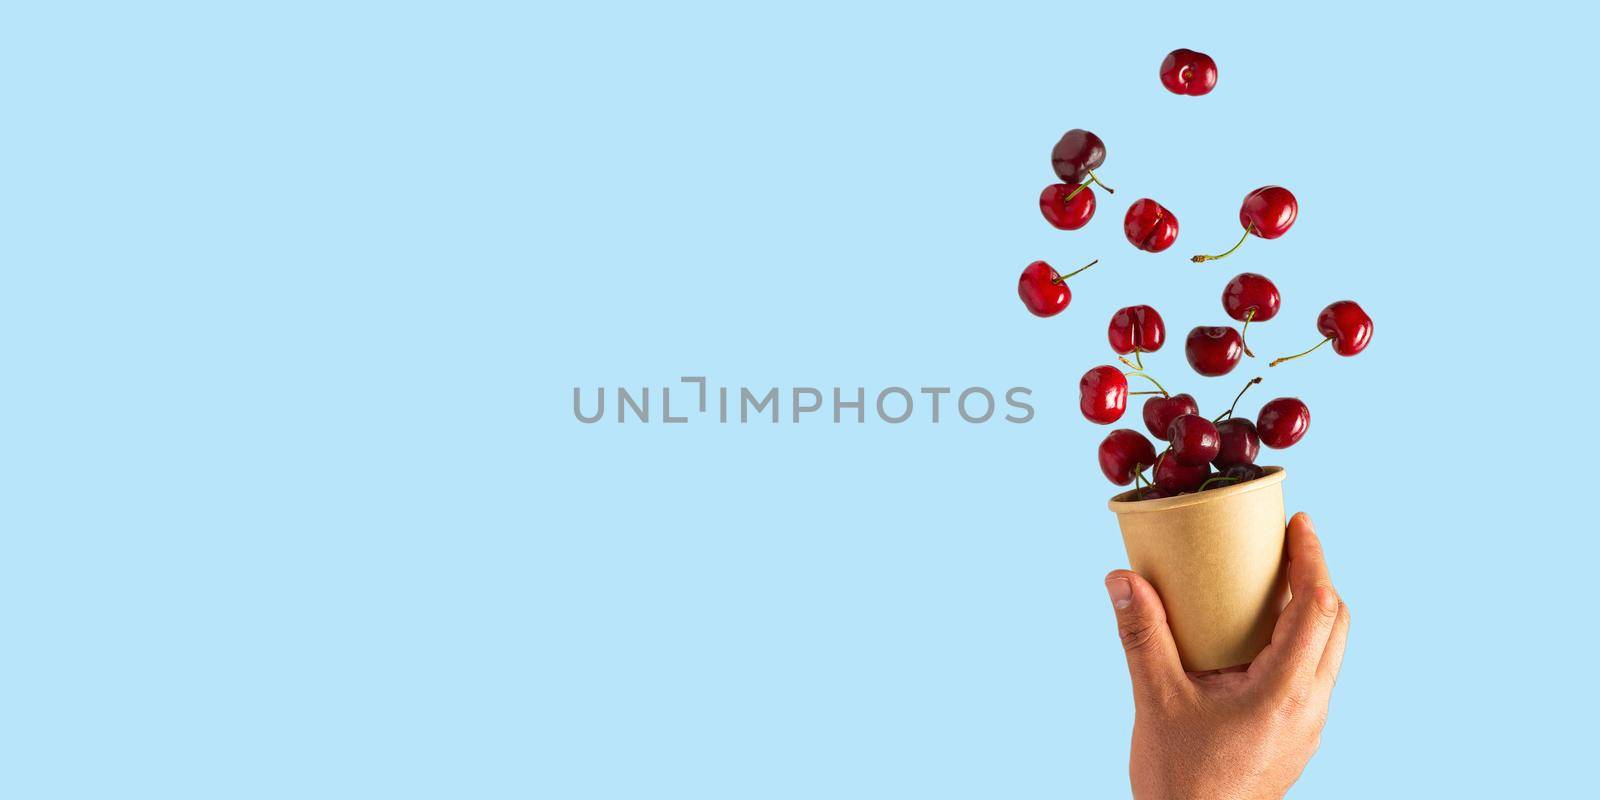 Flying cherries vertical isolated as package design elements. Fresh raw cheery falling in the air by PhotoTime